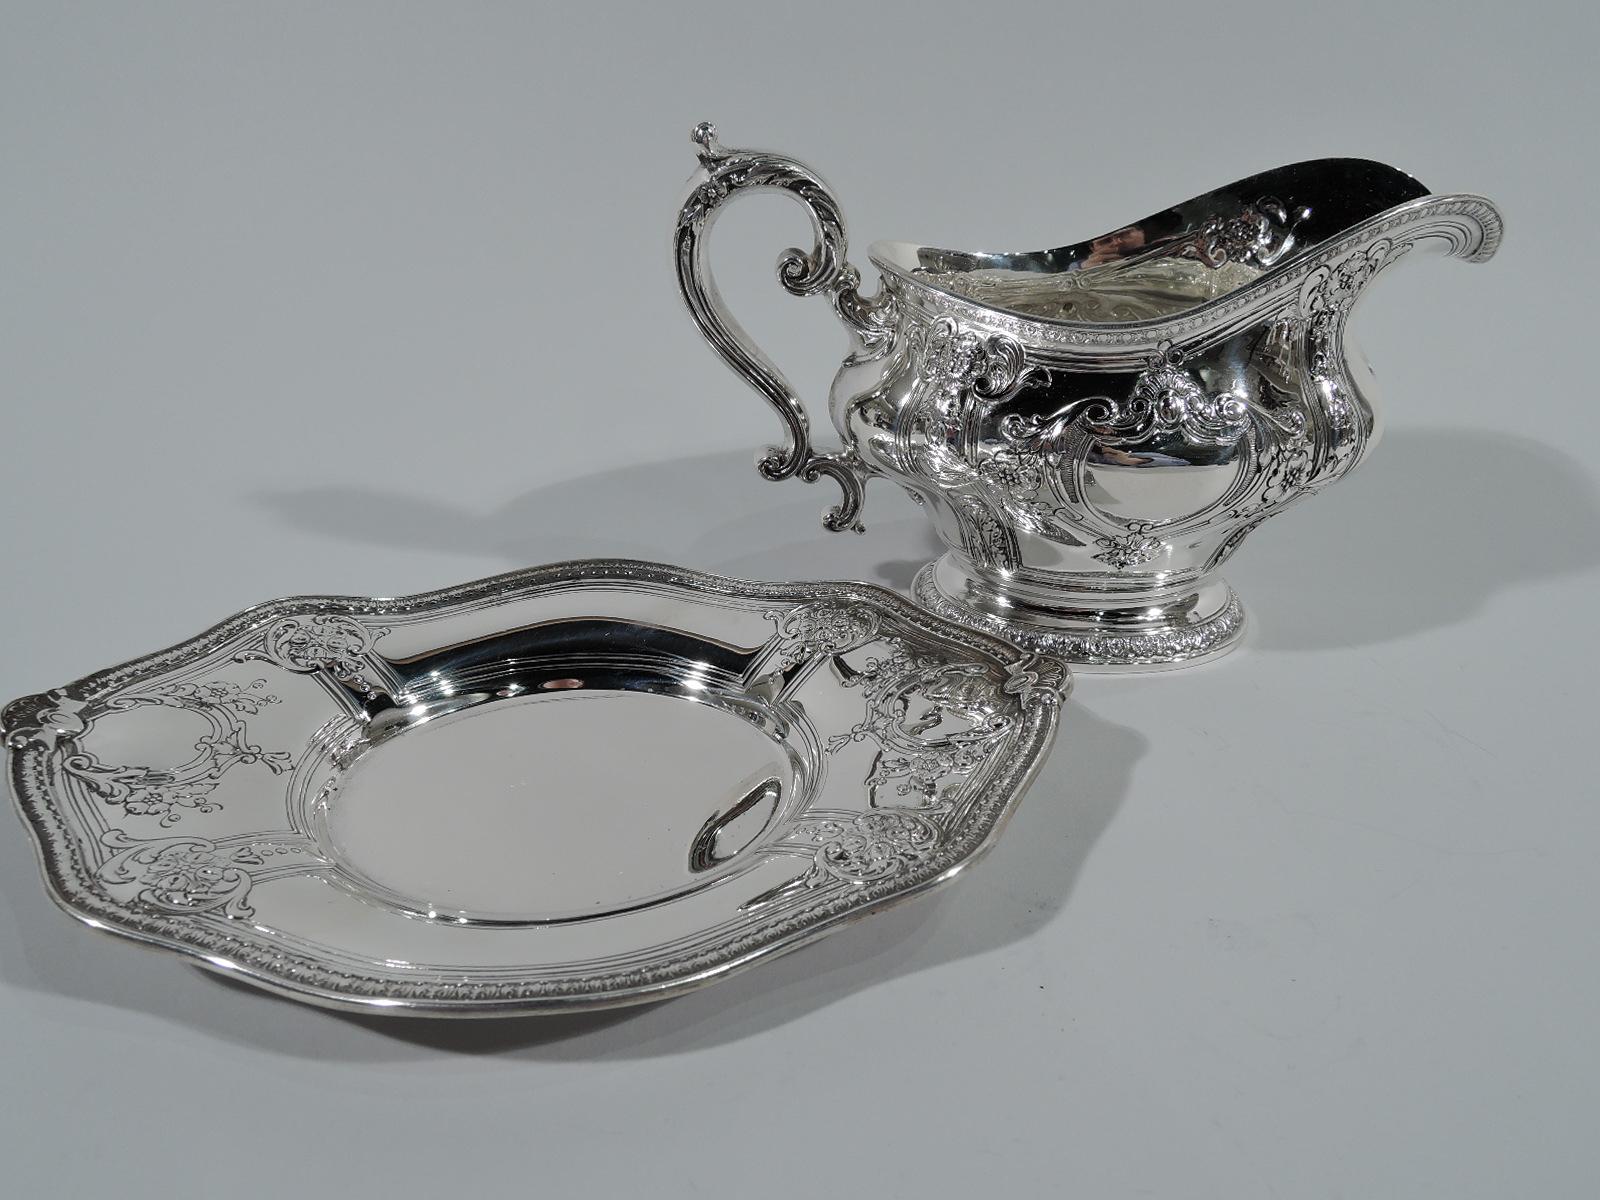 Fancy sterling silver gravy boat on stand in Gregorian pattern. Made by Gorham in Providence. Boat: Bellied with helmet mouth, leaf-capped s-scroll handle, and raised oval foot. Stand: Shaped with oval well. Pendant flowers, shells, and armorial